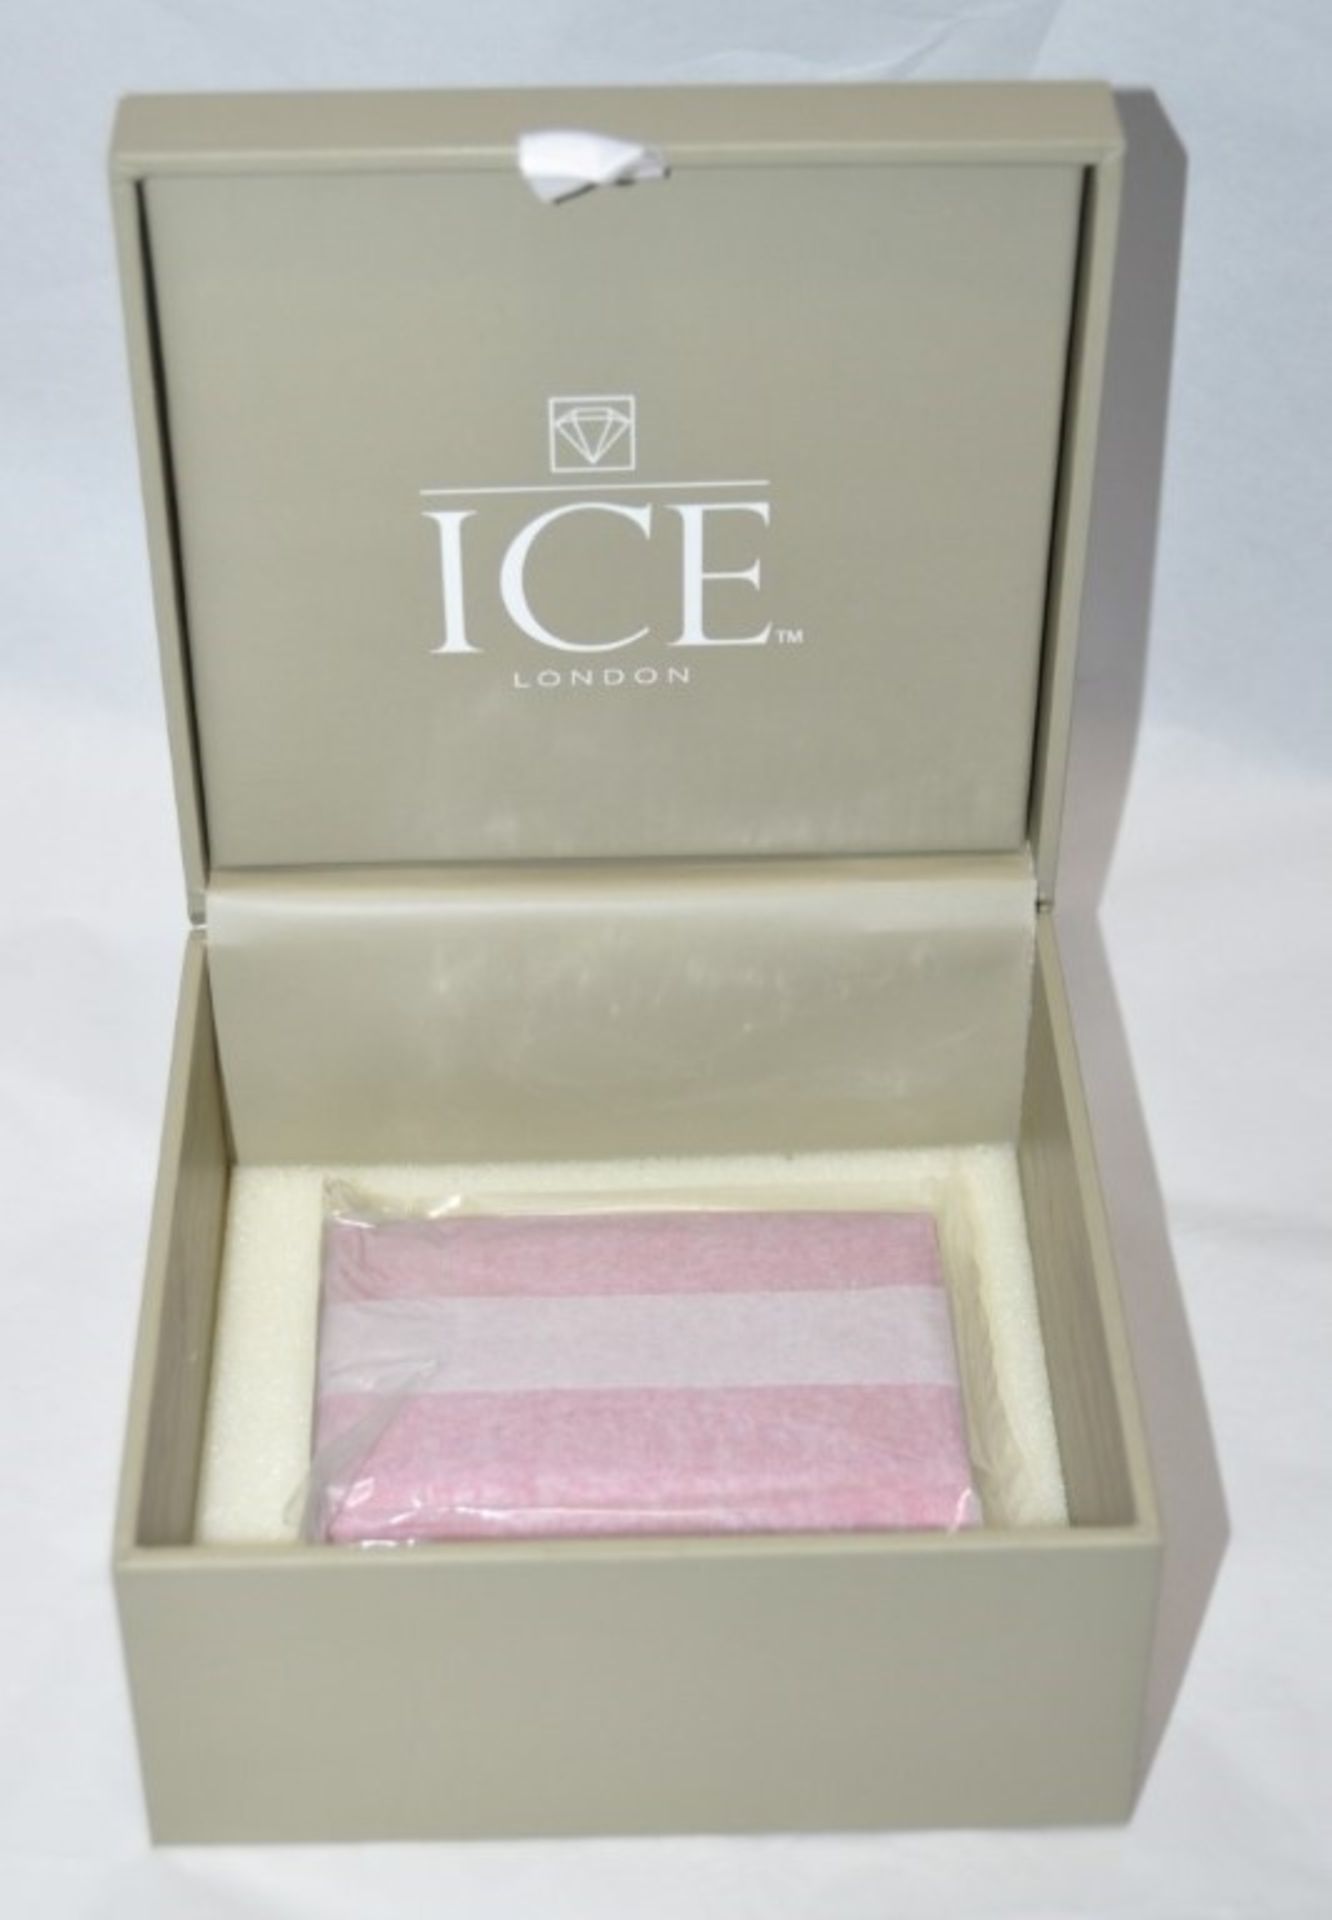 24 x Genuine Fine Leather Travel Card / Credit Card Holders by ICE London - EGW-6007-PK - Colour: - Image 3 of 6